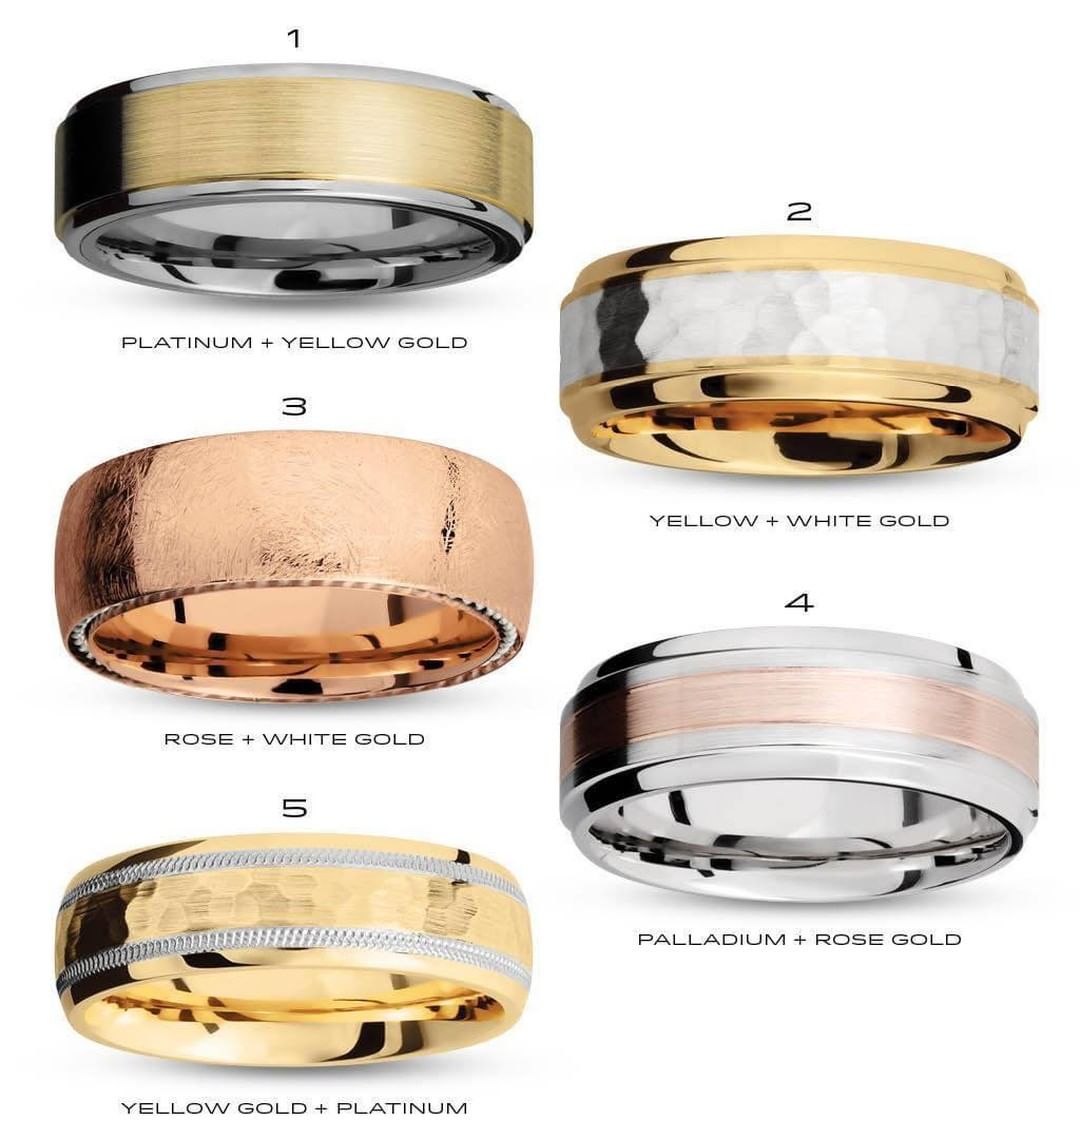 Men's Wedding Band with Diamonds that are Unique because of their combinations